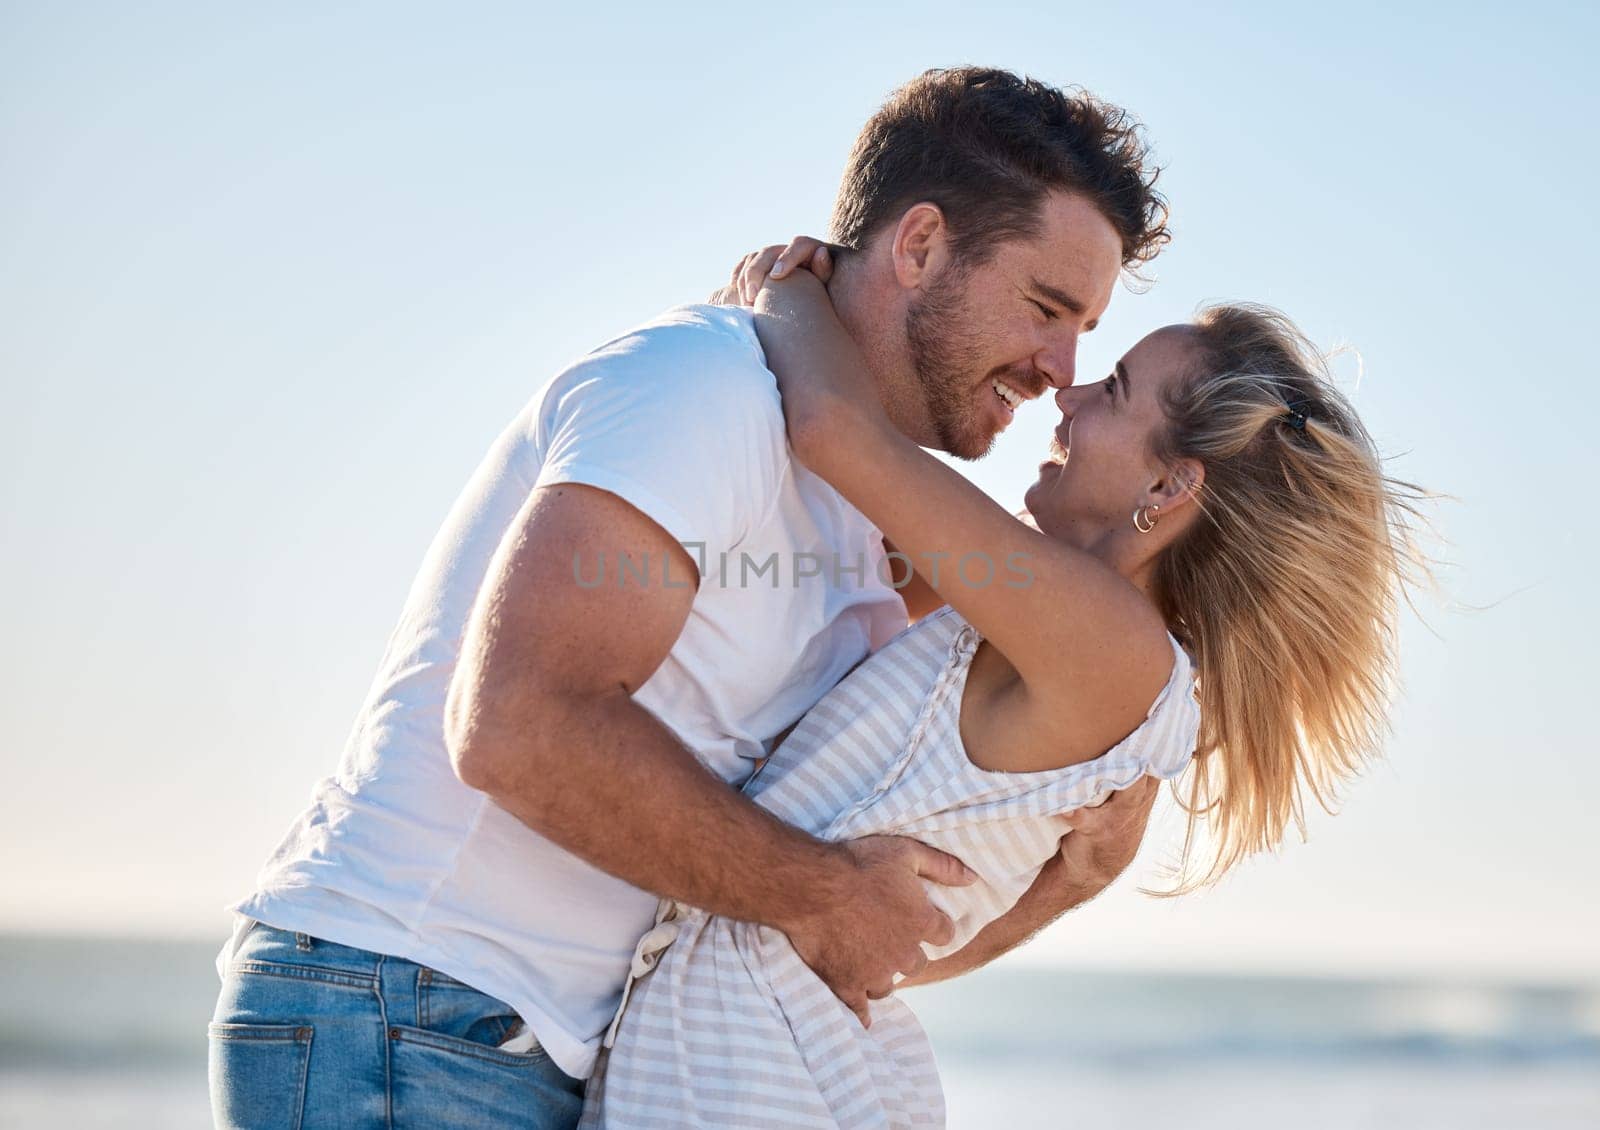 Couple, hug and love, happy at the beach with relationship and romance for bonding and together outdoor by the ocean. Romantic, care and travel date with man and woman hugging and quality time